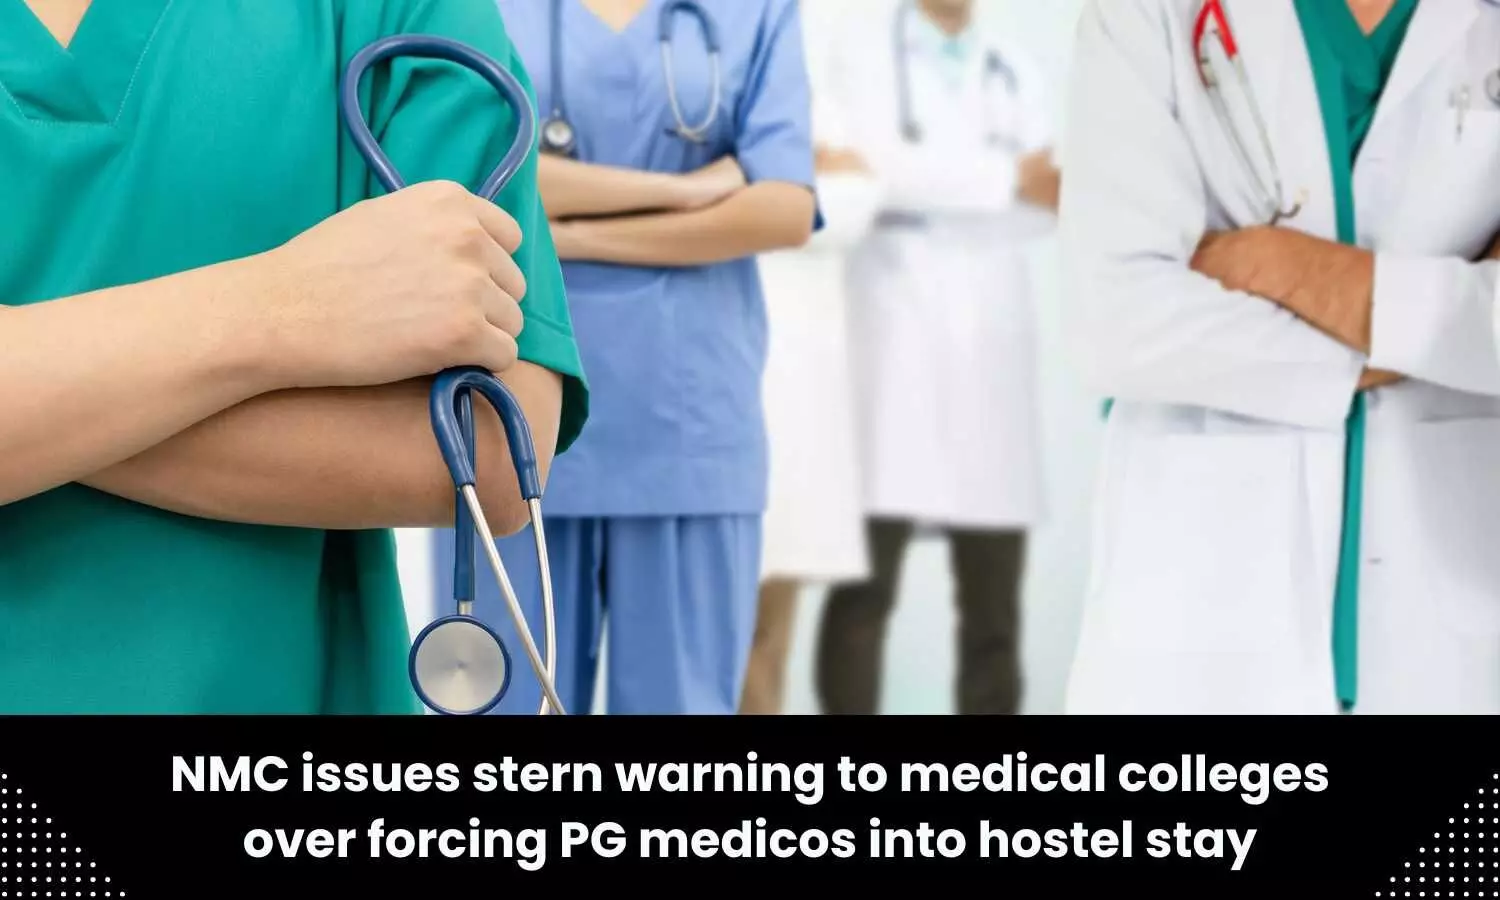 PG medicos compelled to stay in hostel, NMC warns medical colleges